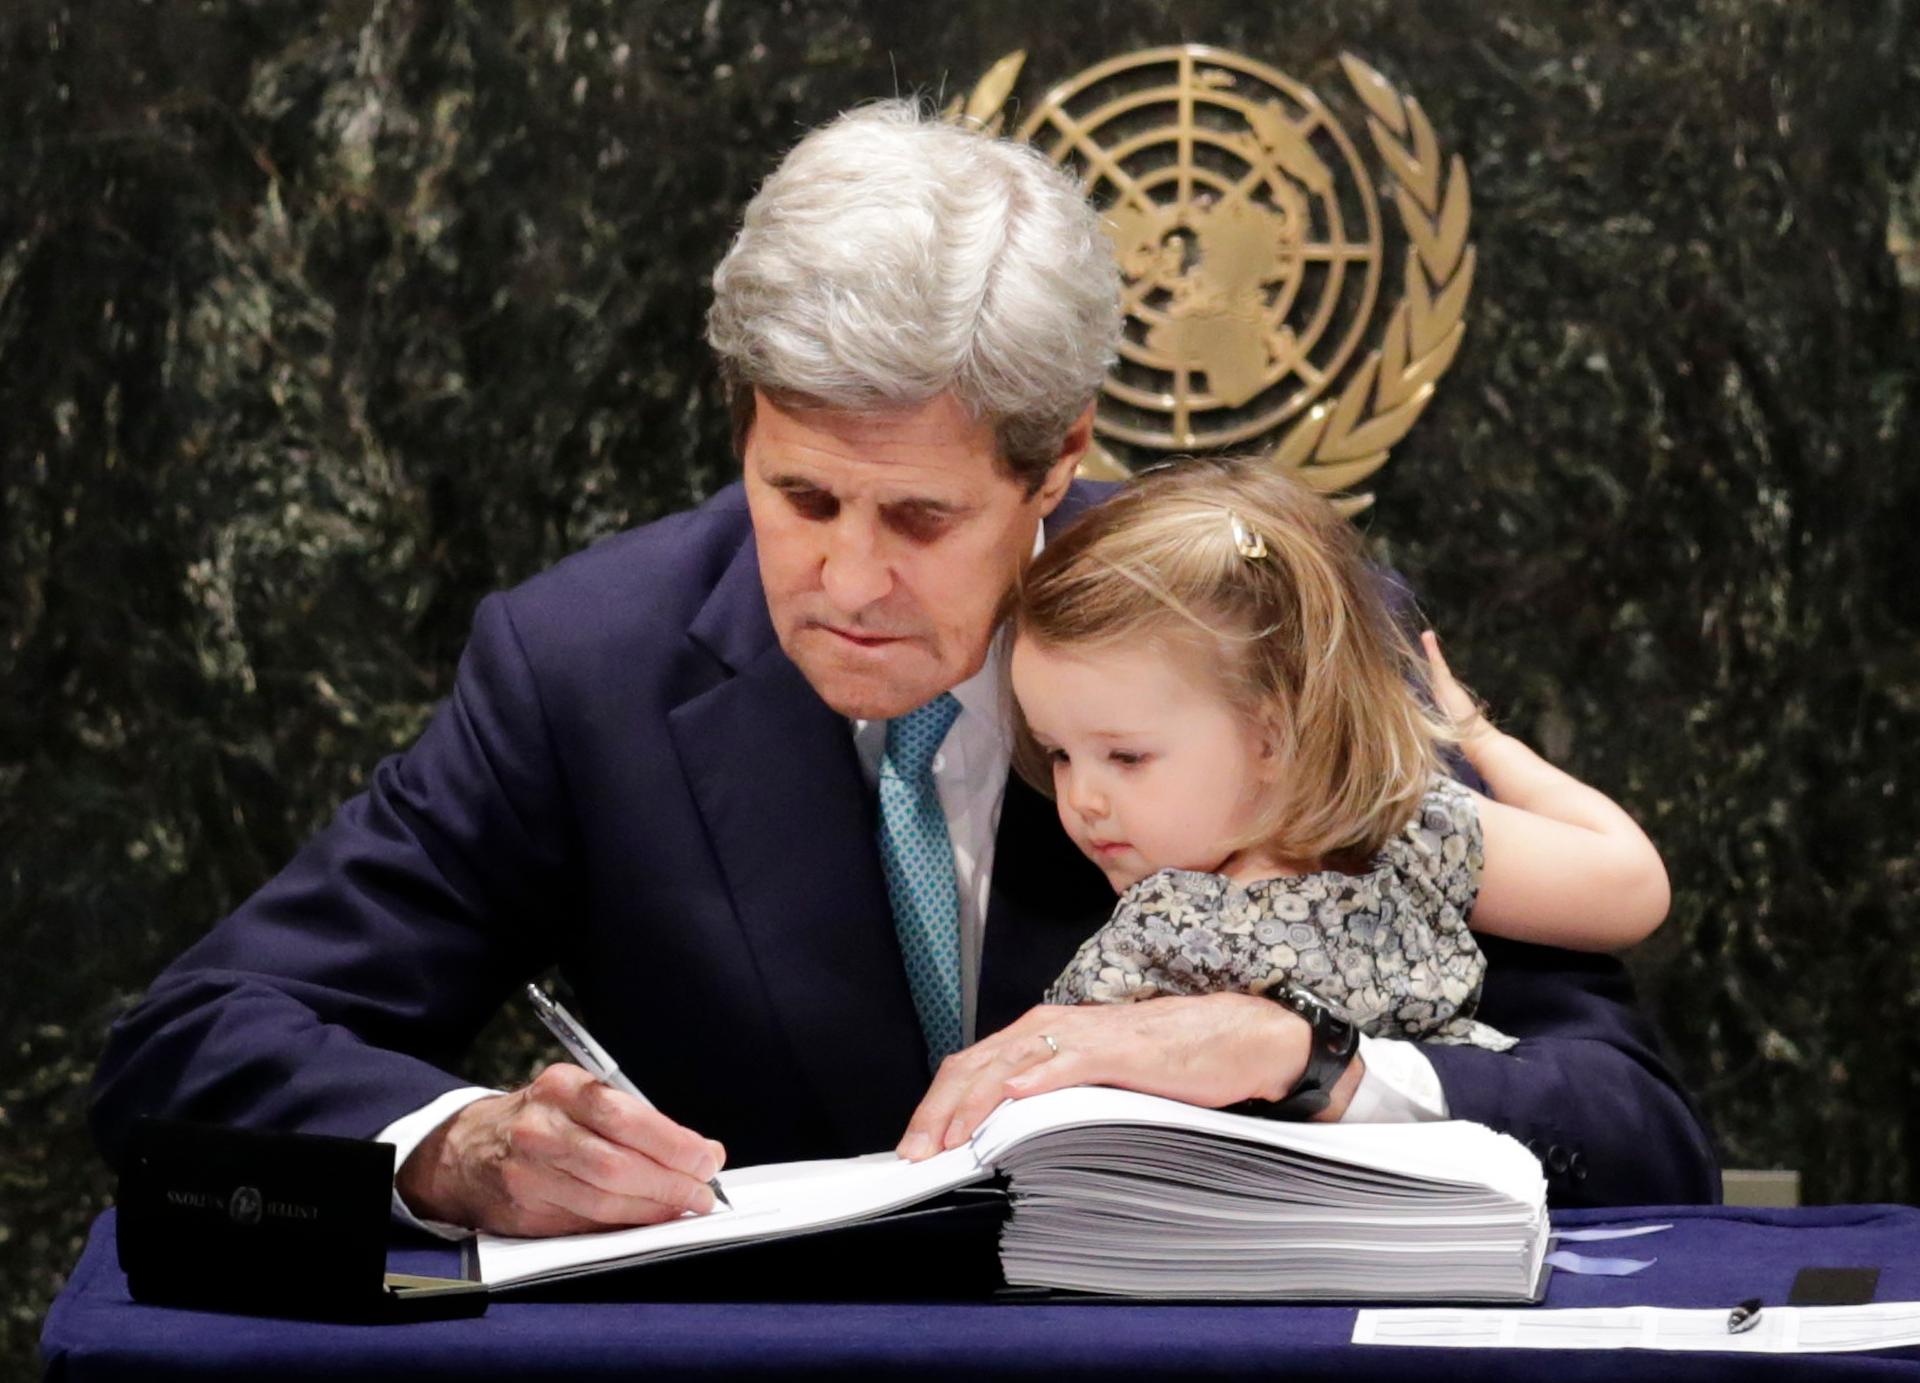 John Kerry and his cute granddaughter at the UN, where he is signing the treaty